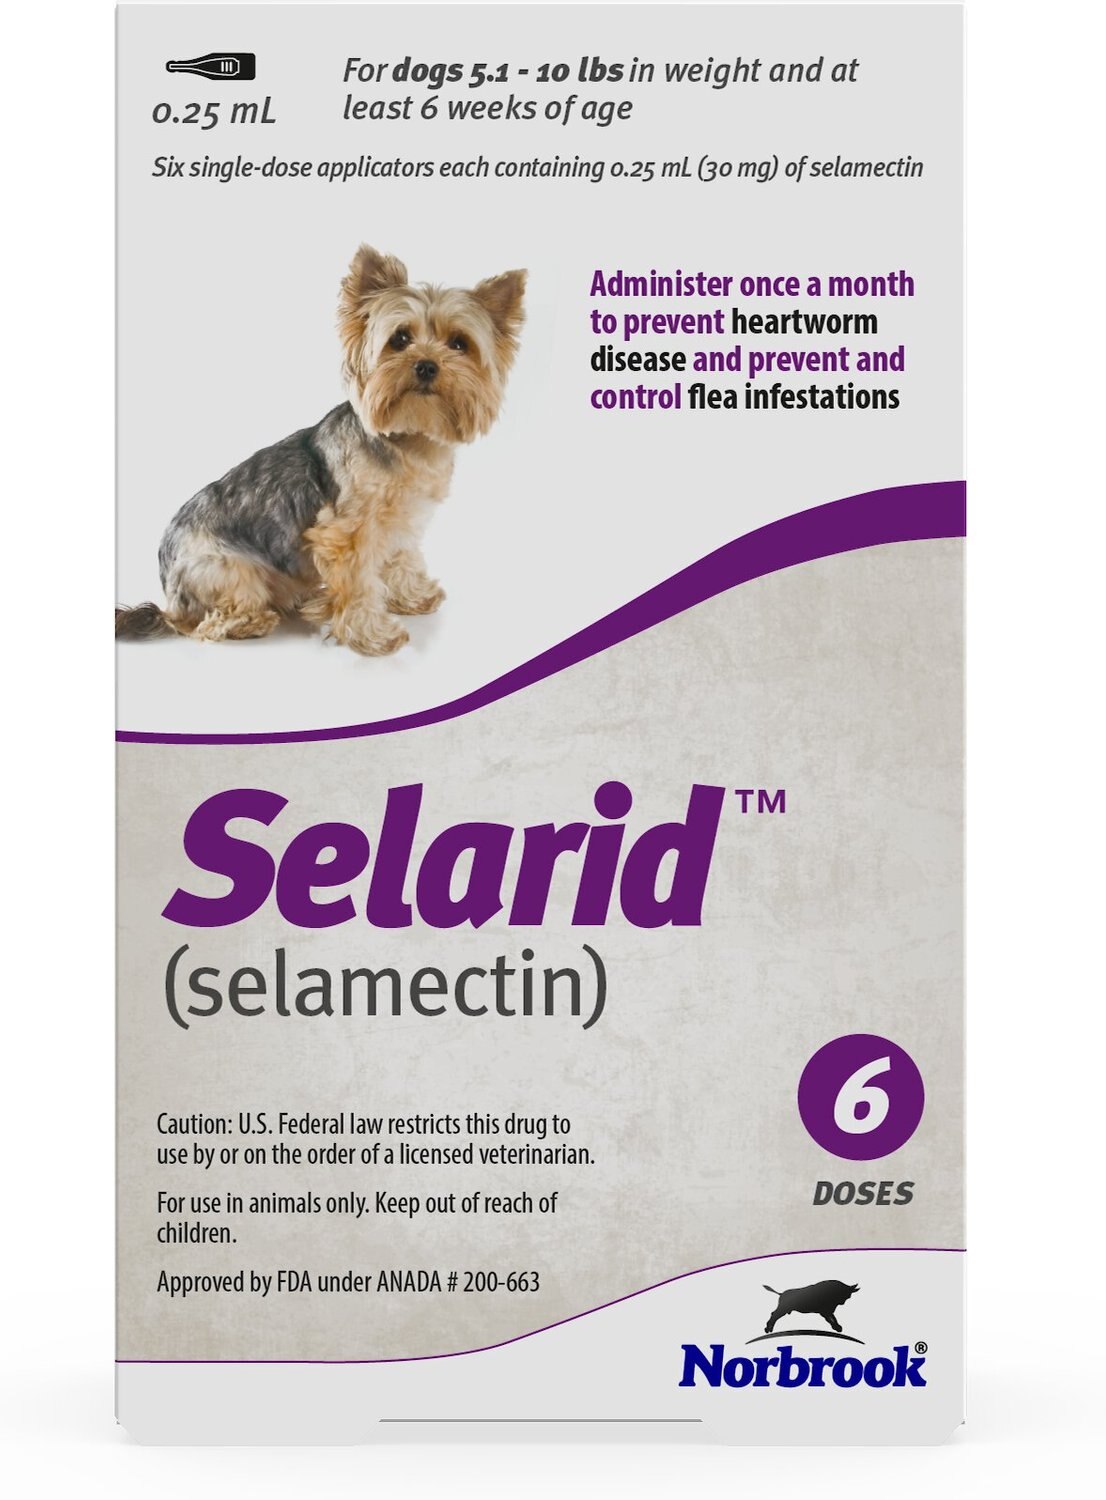 SELARID Topical Solution for Cats, 15.122 lbs, (Taupe Box), 6 Doses (6